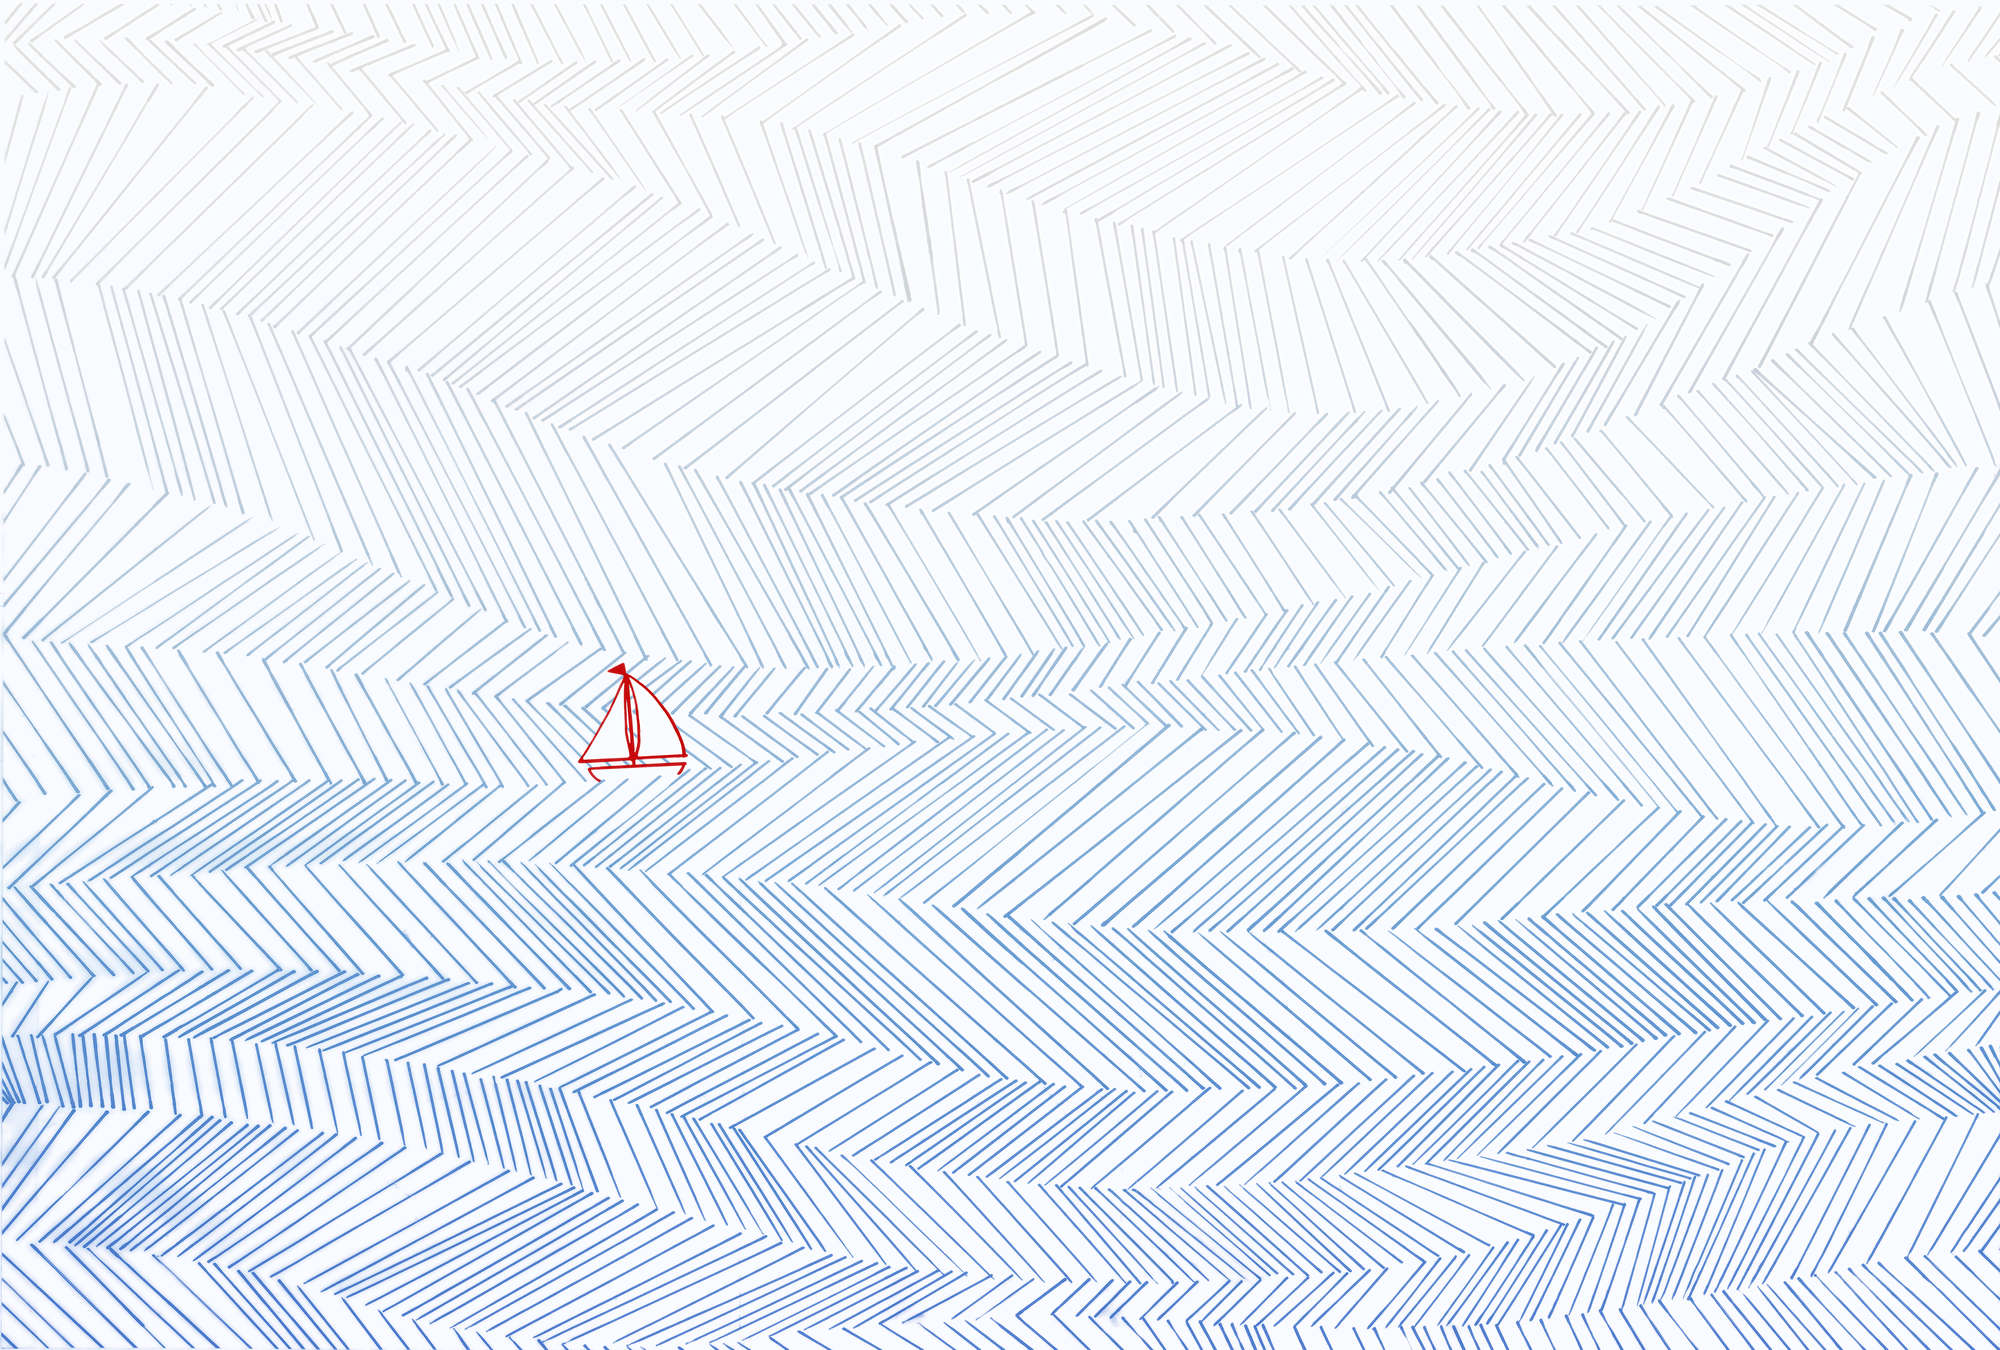             Nursery mural, Sailboat & Waves - Blue, White, Red
        